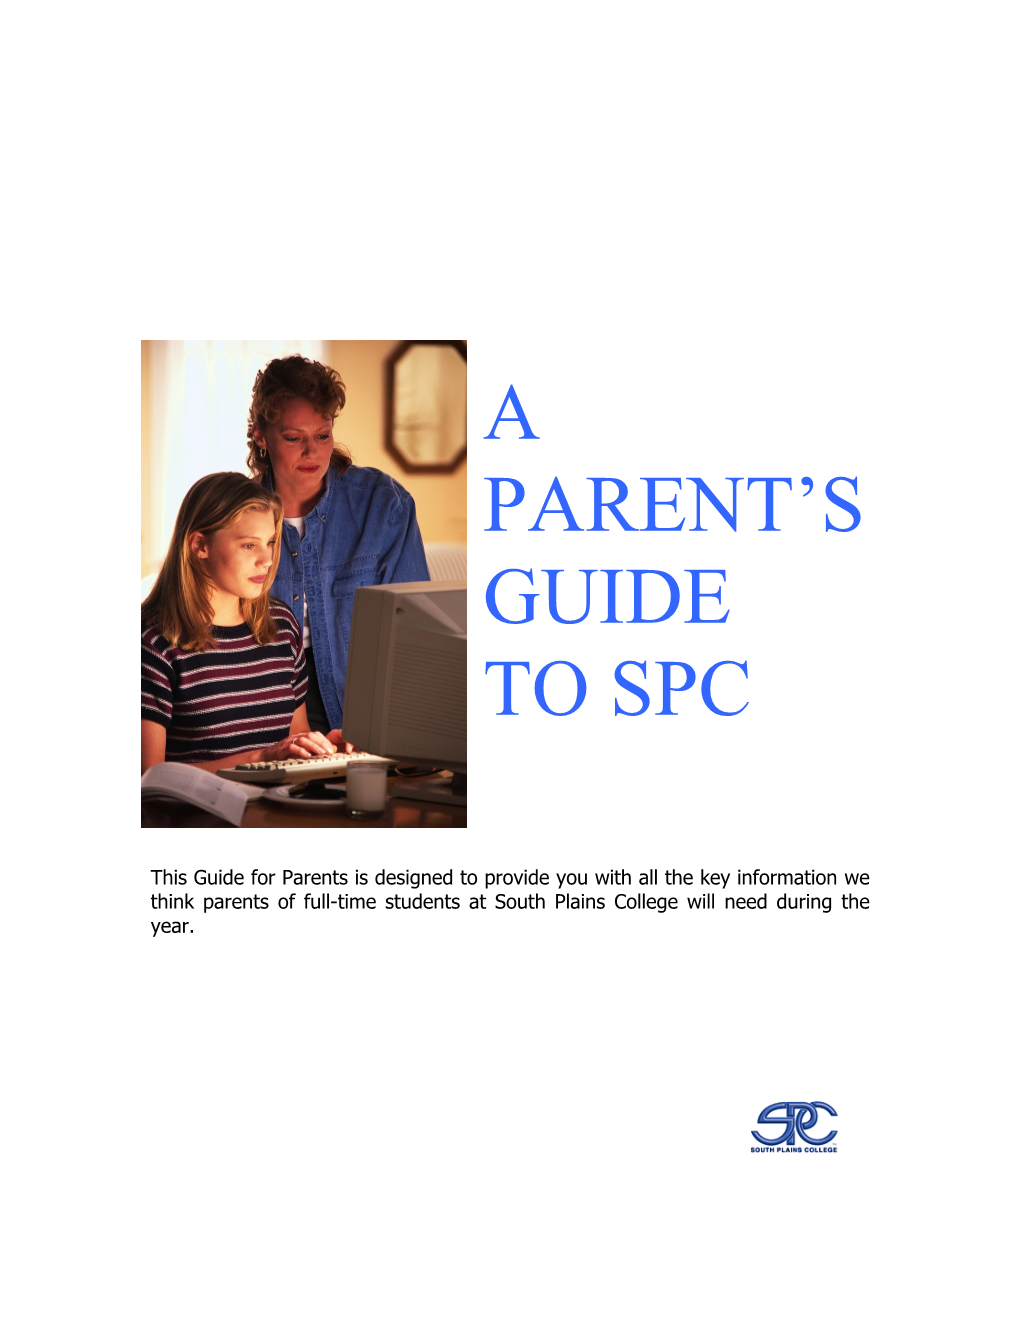 A Guide for Families